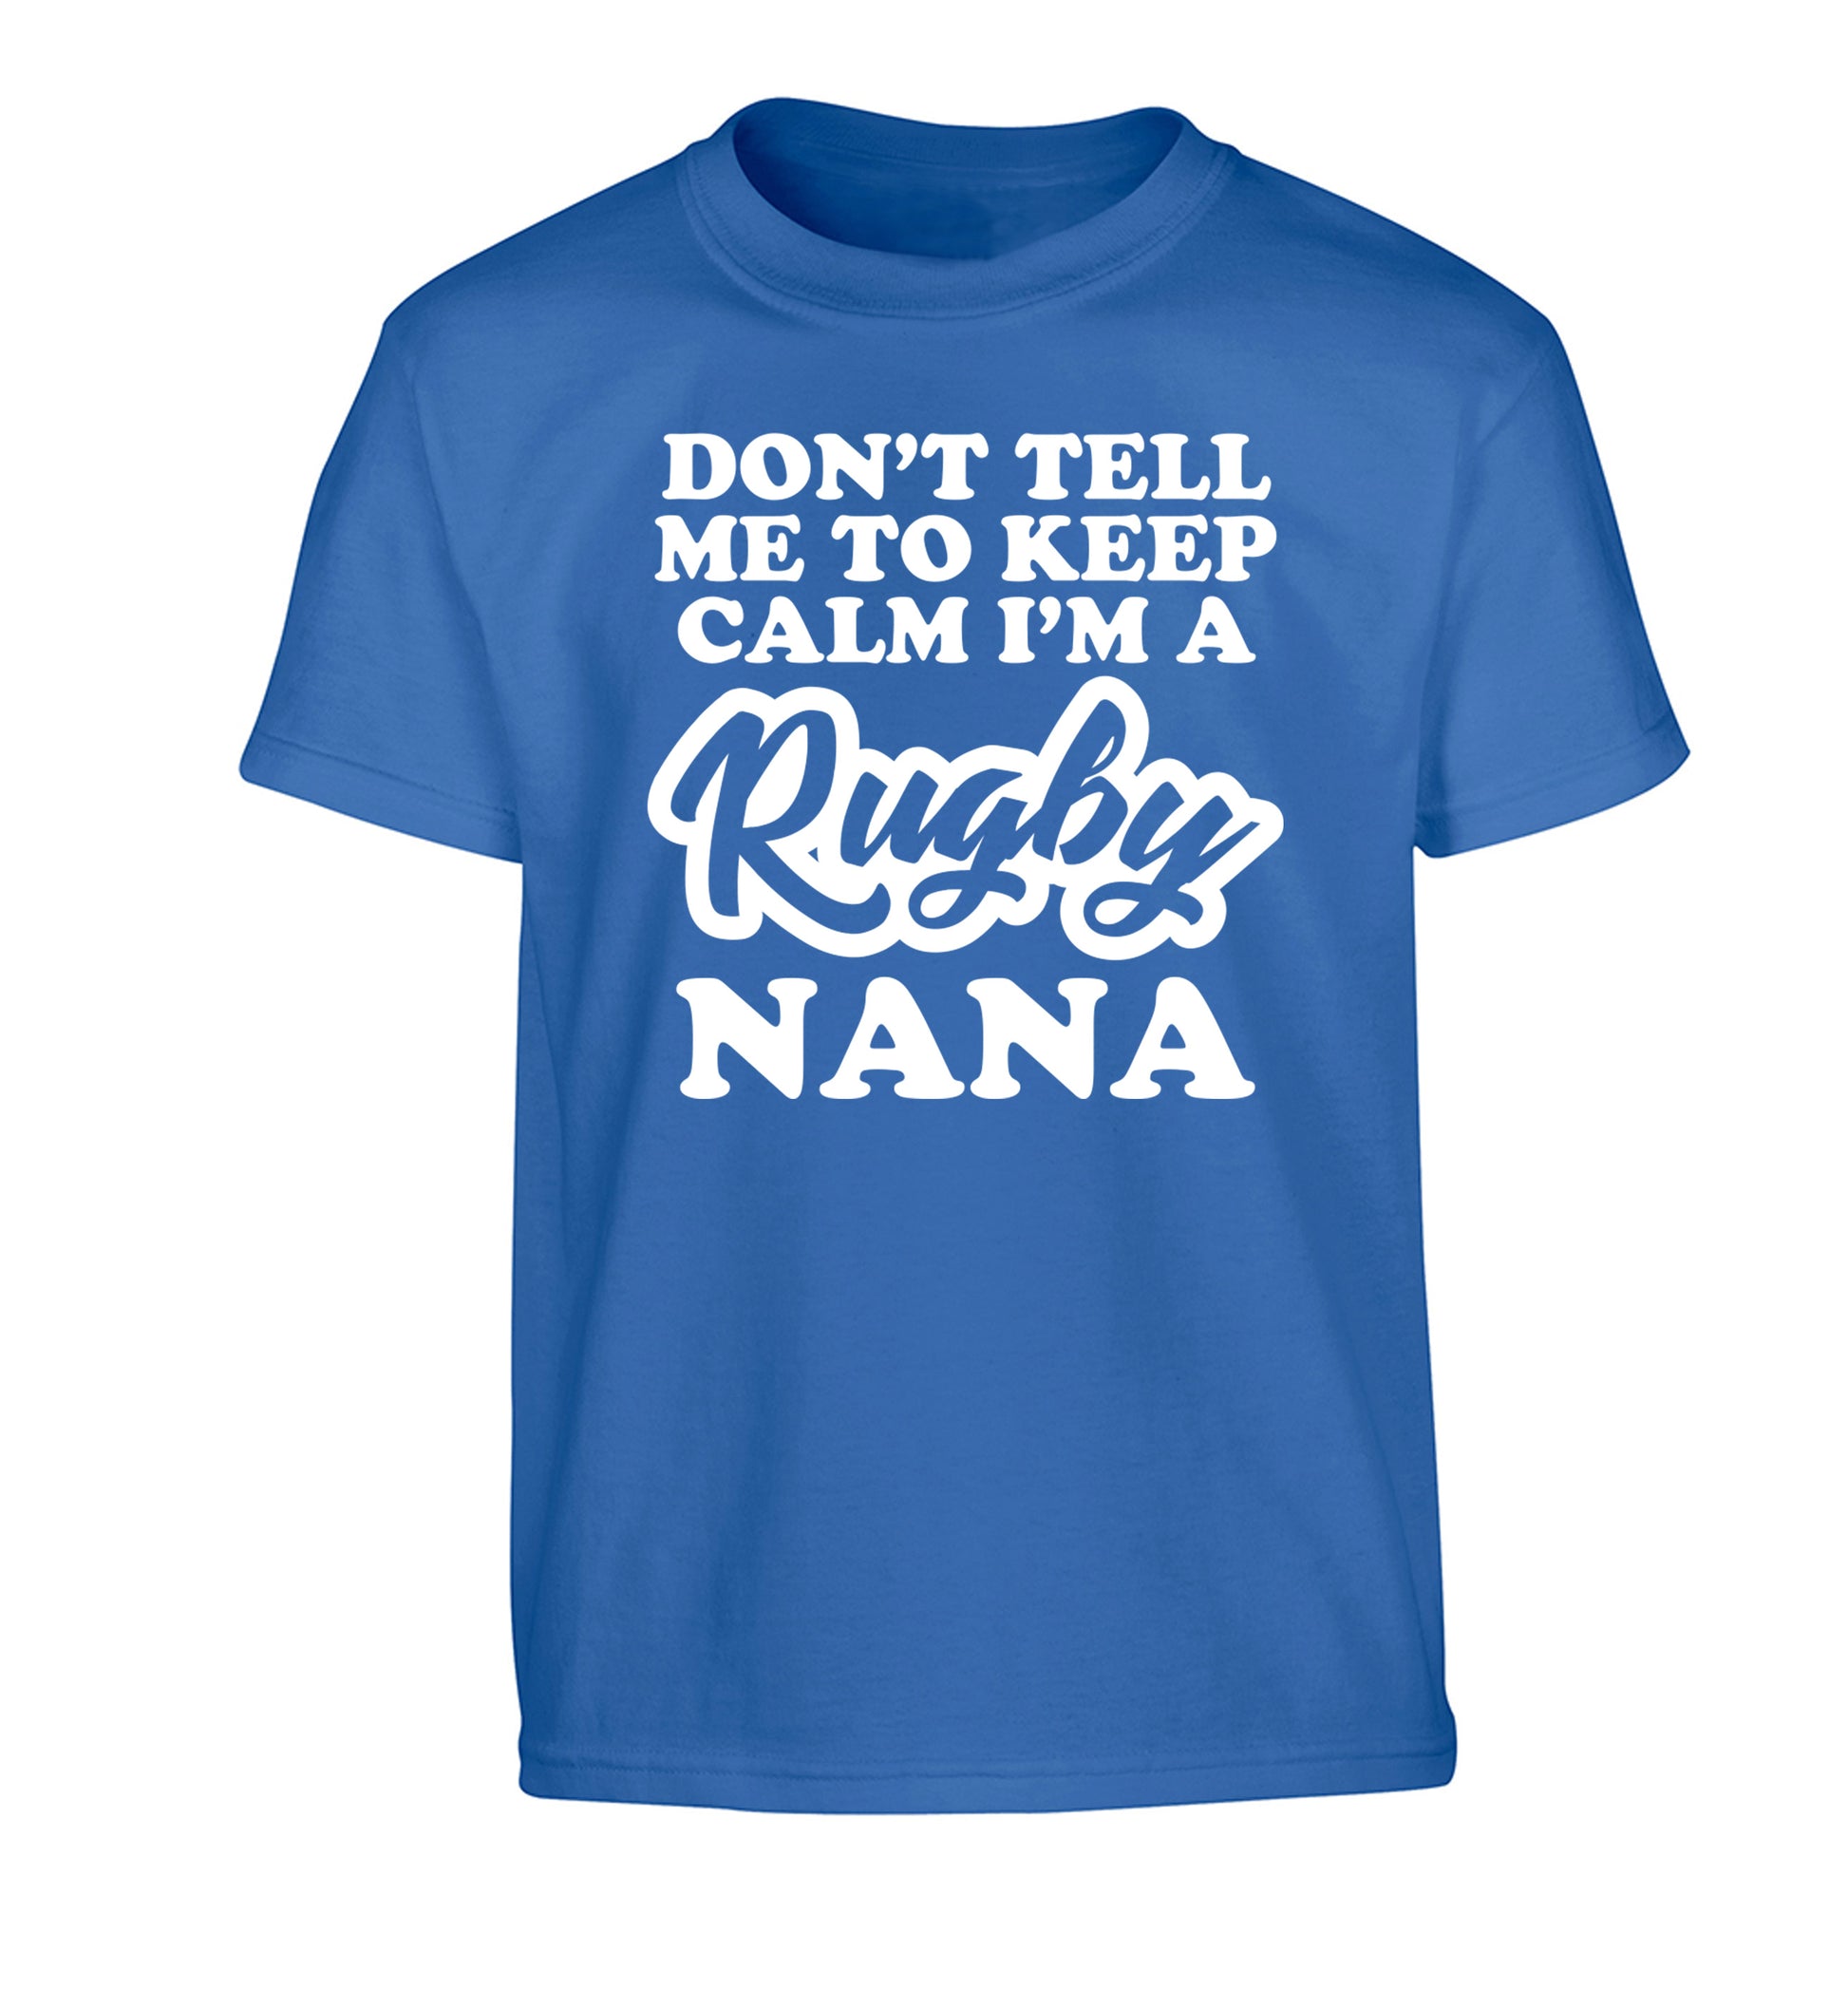 Don't tell me to keep calm I'm a rugby nana Children's blue Tshirt 12-13 Years